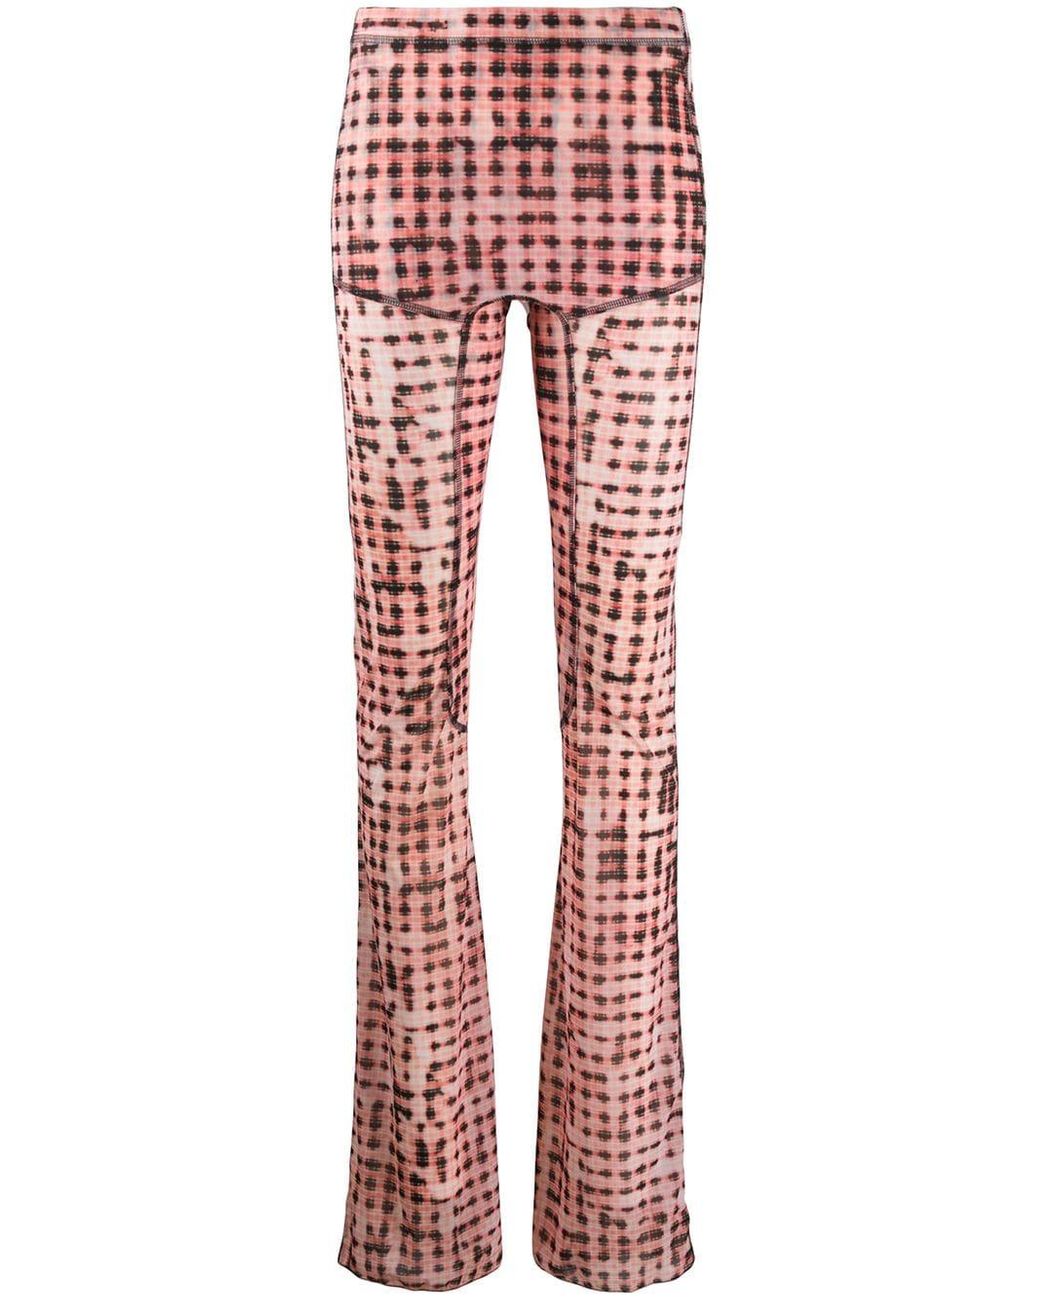 CHARLOTTE KNOWLES Checked Print Flared leggings in Pink | Lyst